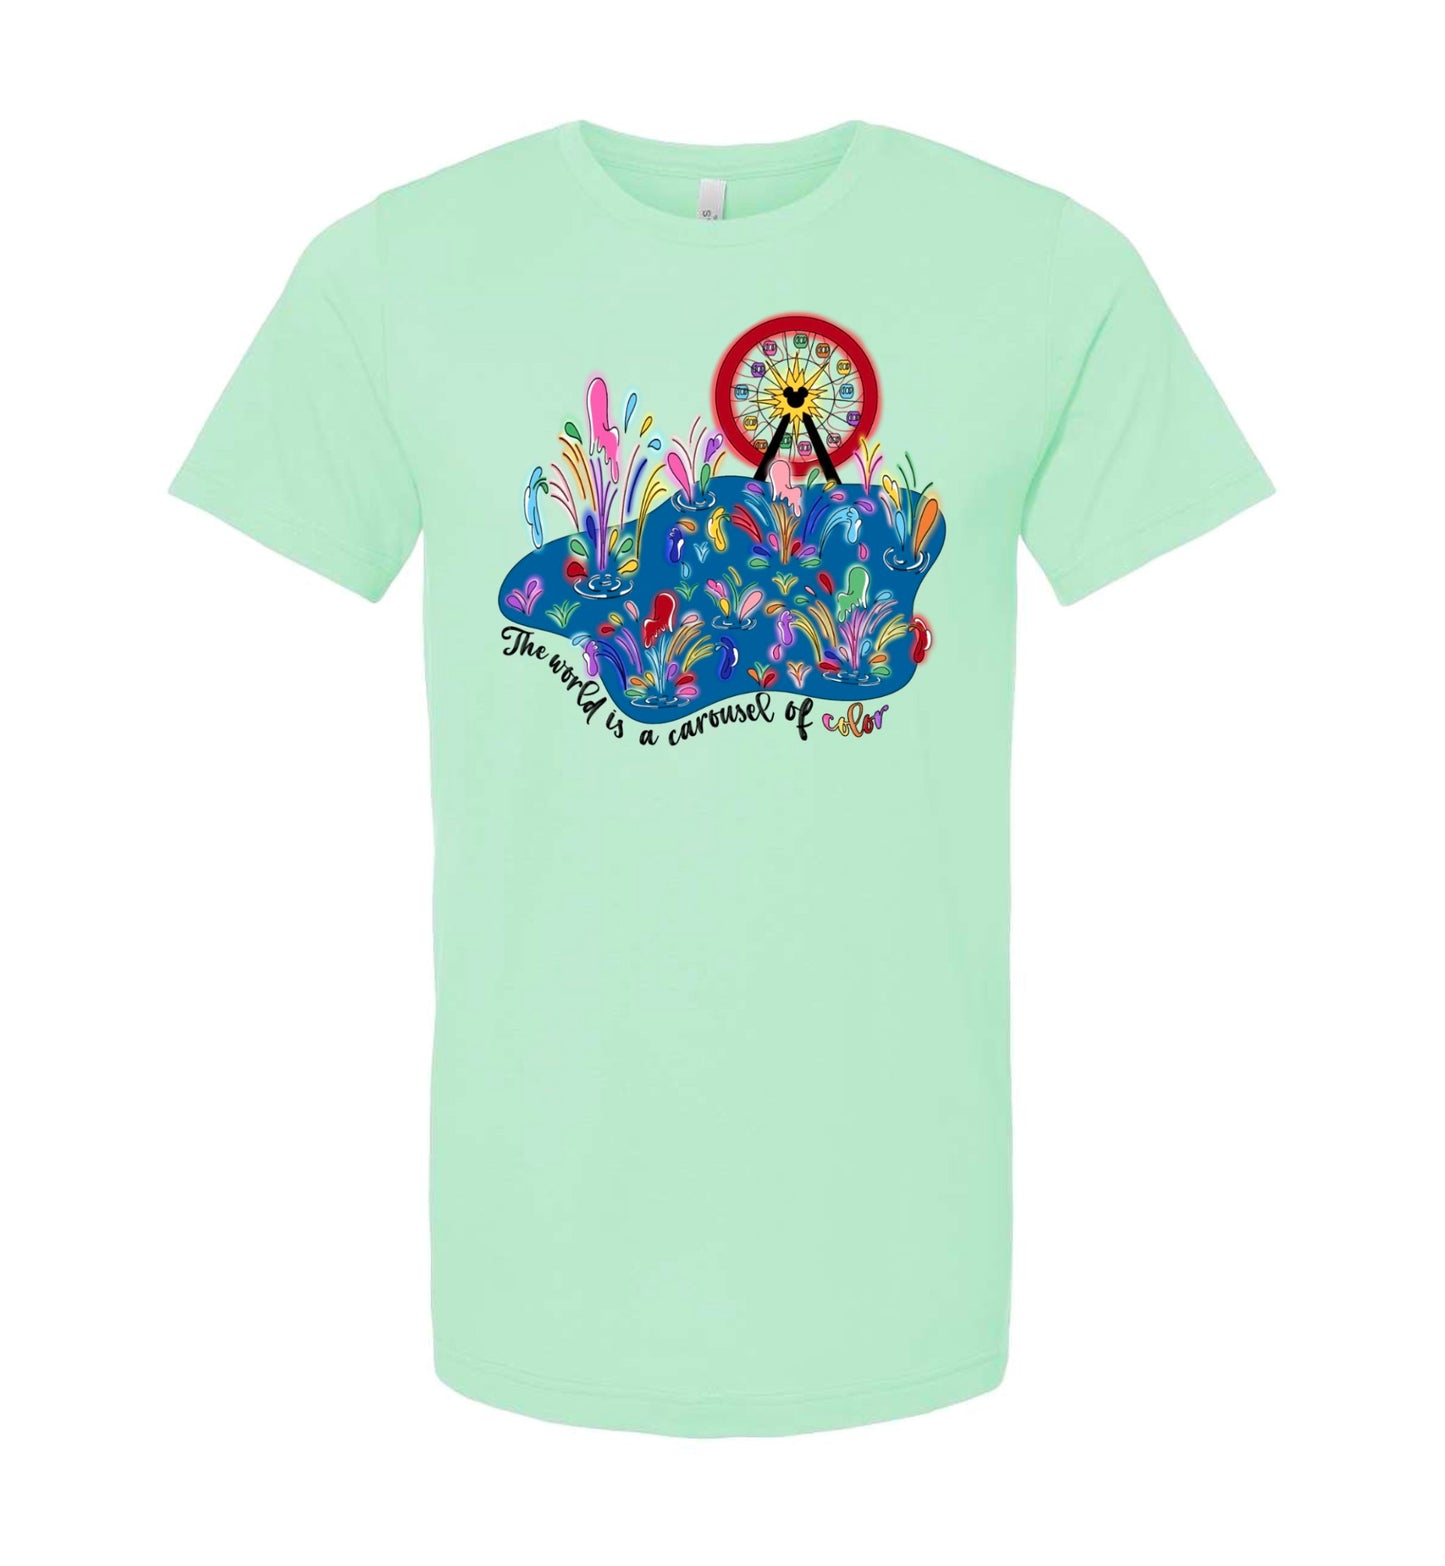 Carousel of Color Tee